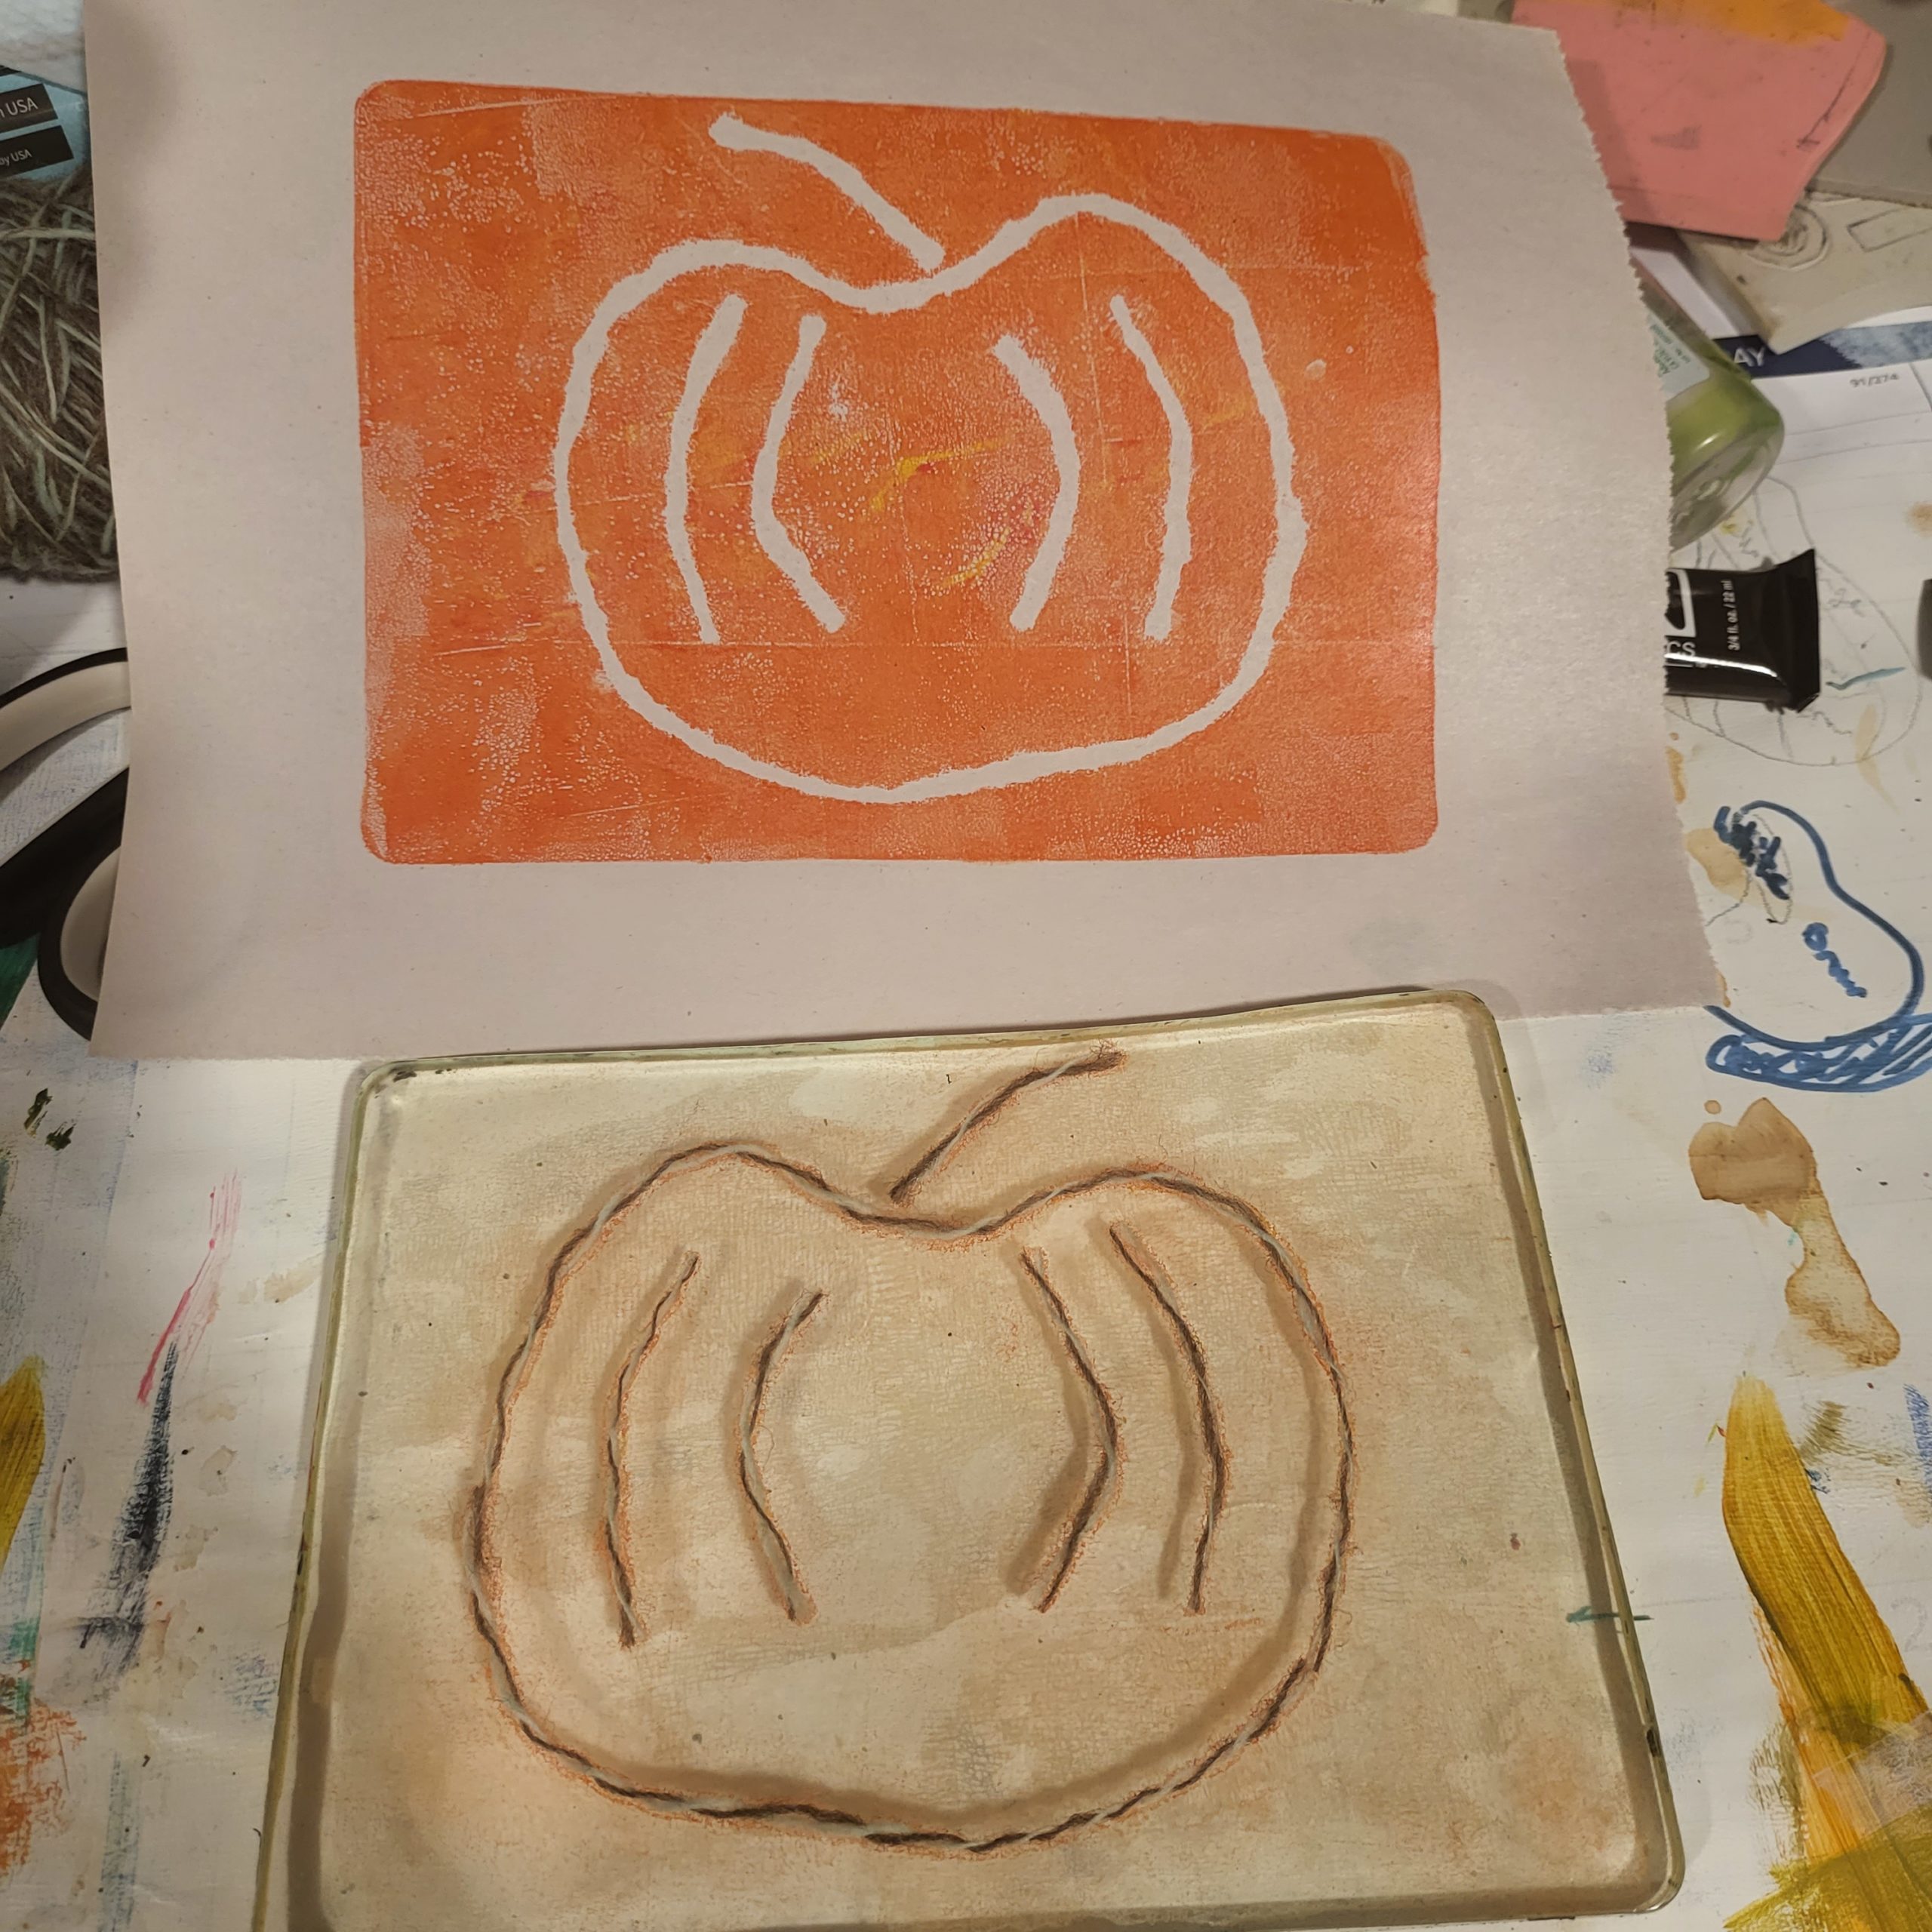 The bottom half of this image shows a gelatin plate with yarn on it, forming a simple pumpkin shape. The top half is the print that just came off the same gelatin plate - an orange field with a pumpkin shape outline that is the color of the underlying paper.